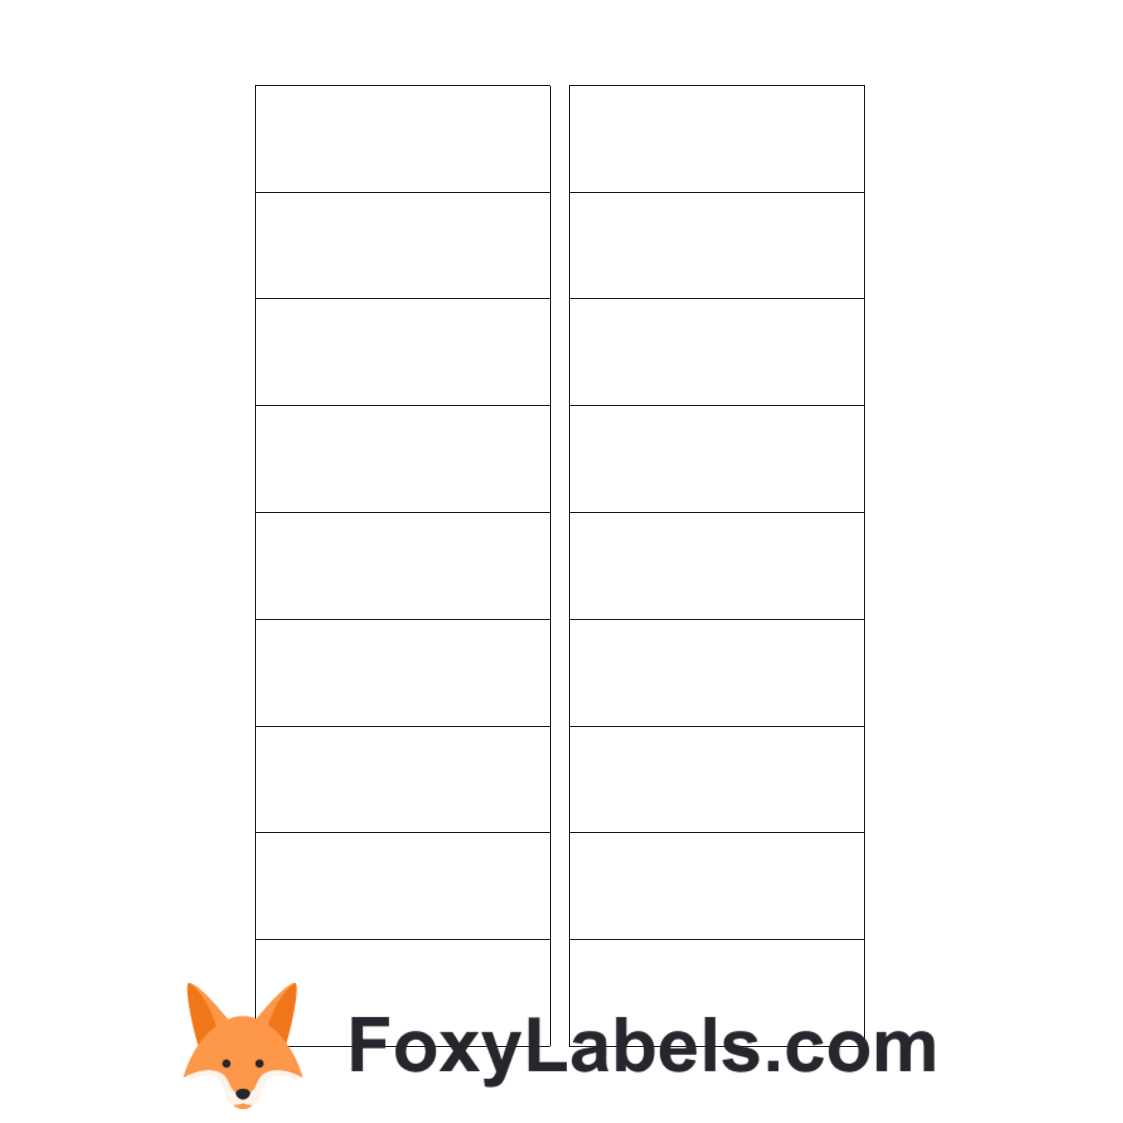 Avery J8871 label template for Google Docs